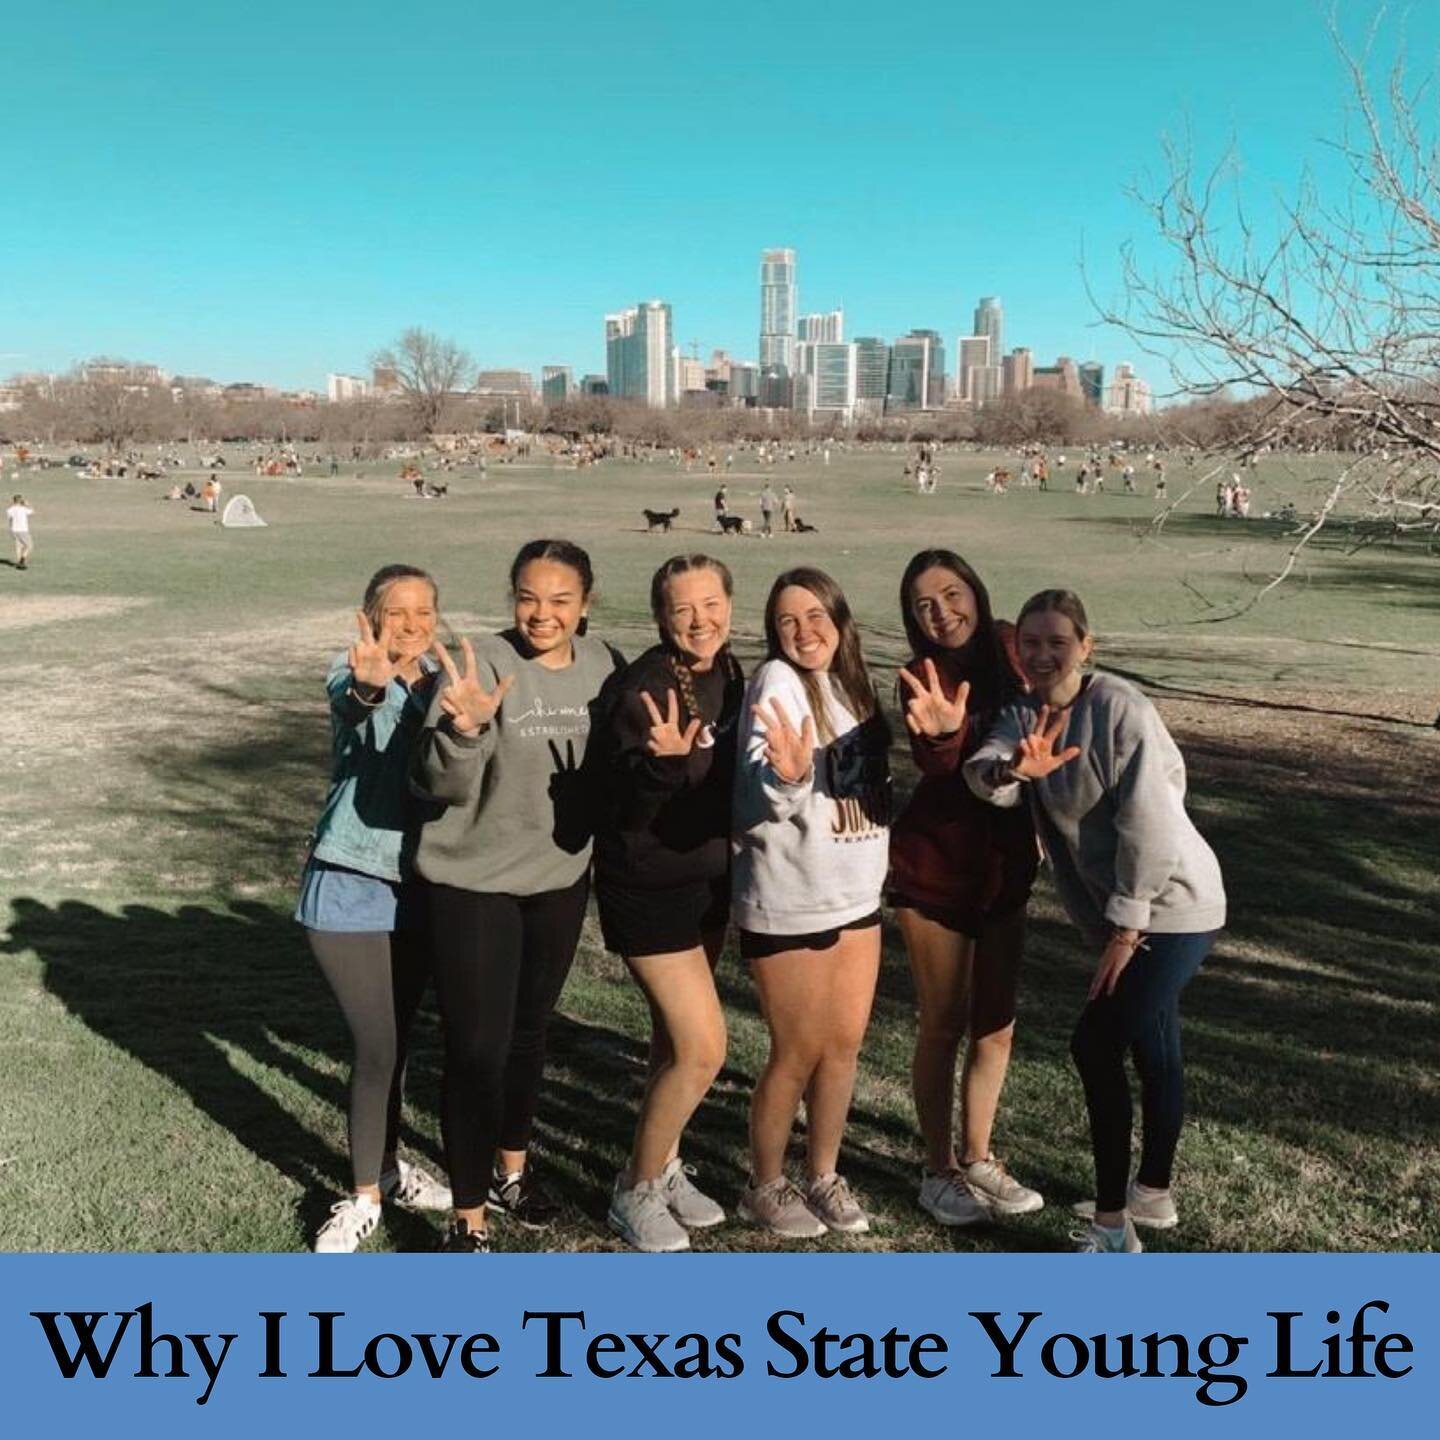 &ldquo;I love Texas State Young Life because of the community it brings you. For me being a freshman was hard because I didn&rsquo;t know anybody at Texas State, but I can gladly say all my friends I have now are people that I met through Young Life.